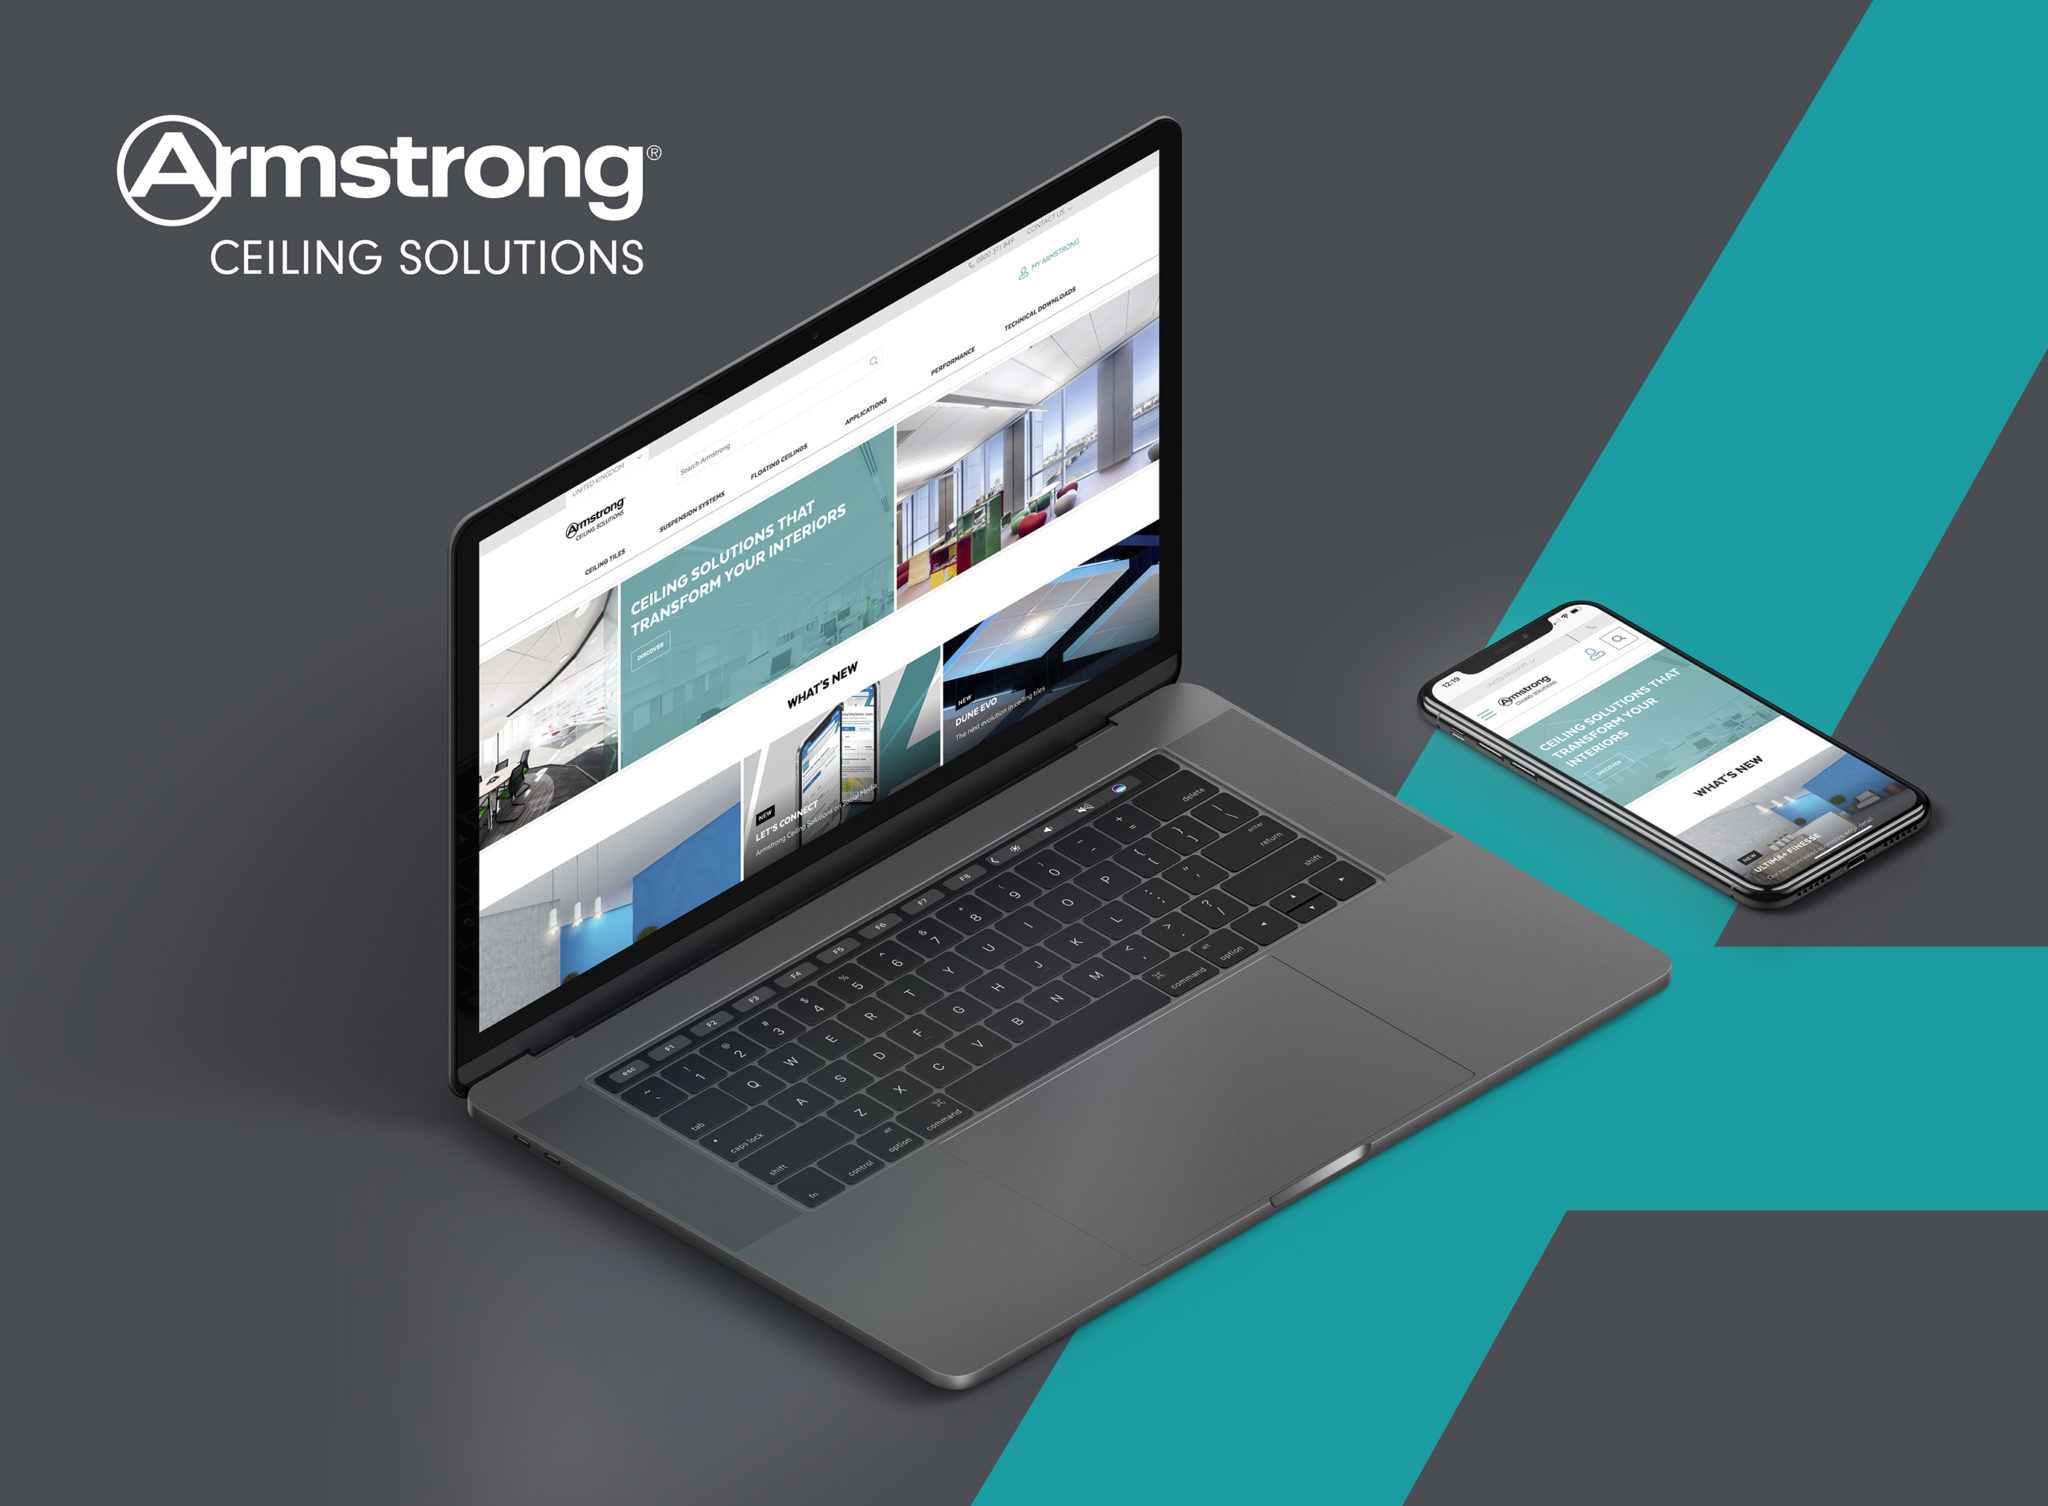 Armstrong Ceiling Solutions launches new website